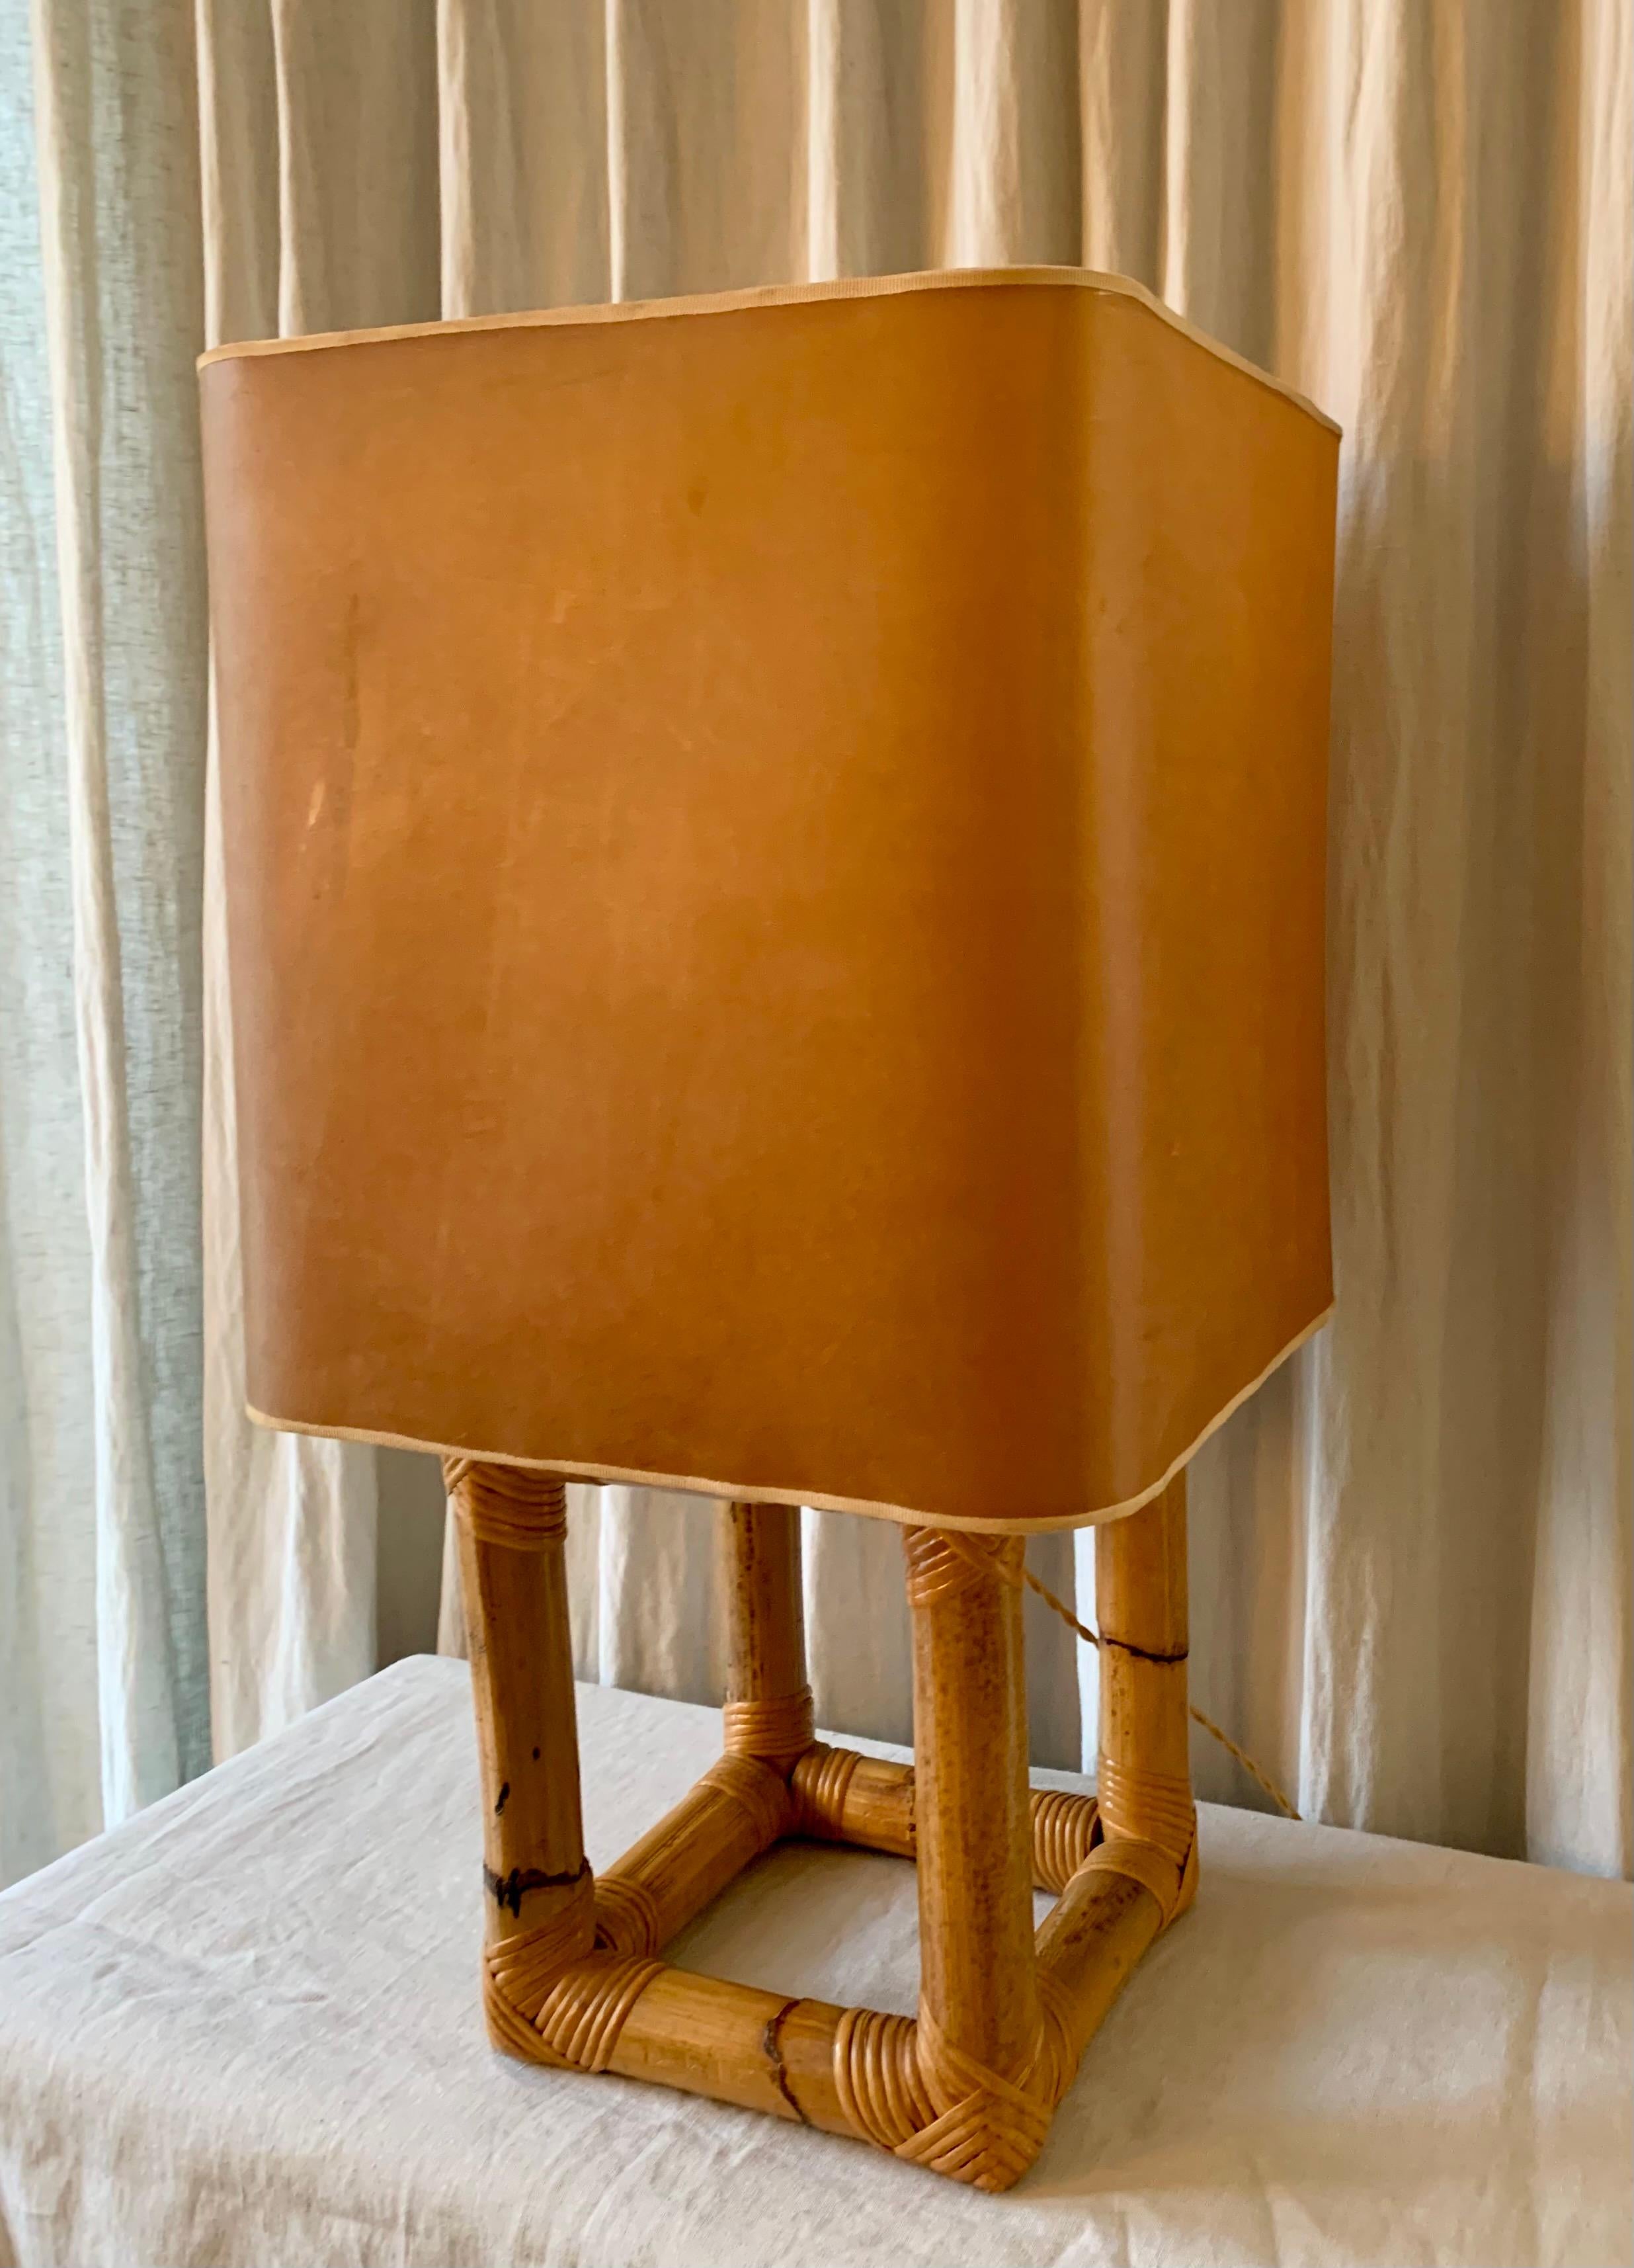 Elegant vintage bamboo 1970s table lamp with the original large shade made of thin animal skin which allows the light to shine through in a warm subtle way.  